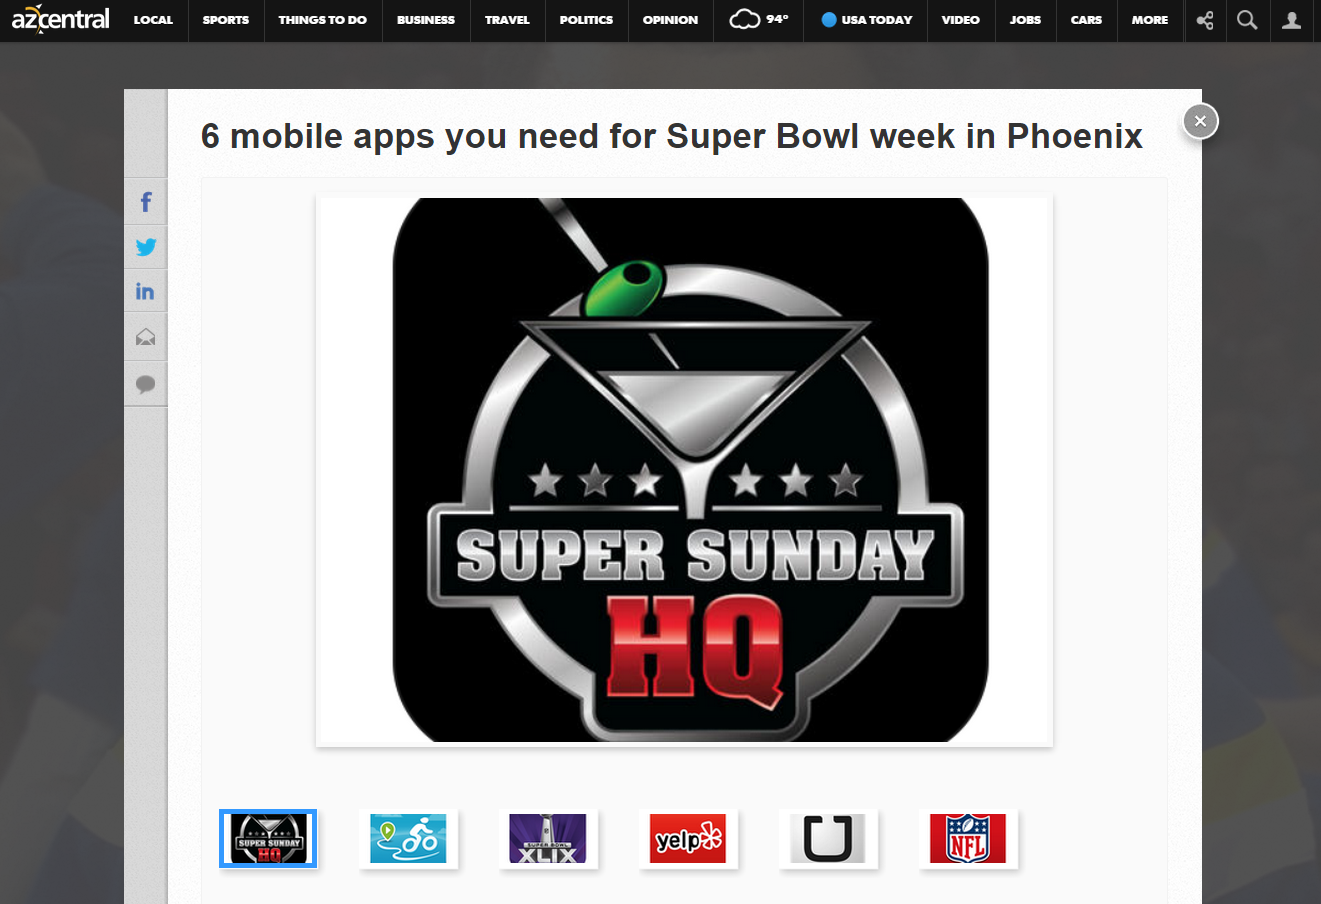 The Super Sunday HQ App allows  fans to connect with each other as they plan and share their Super Bowl Week!